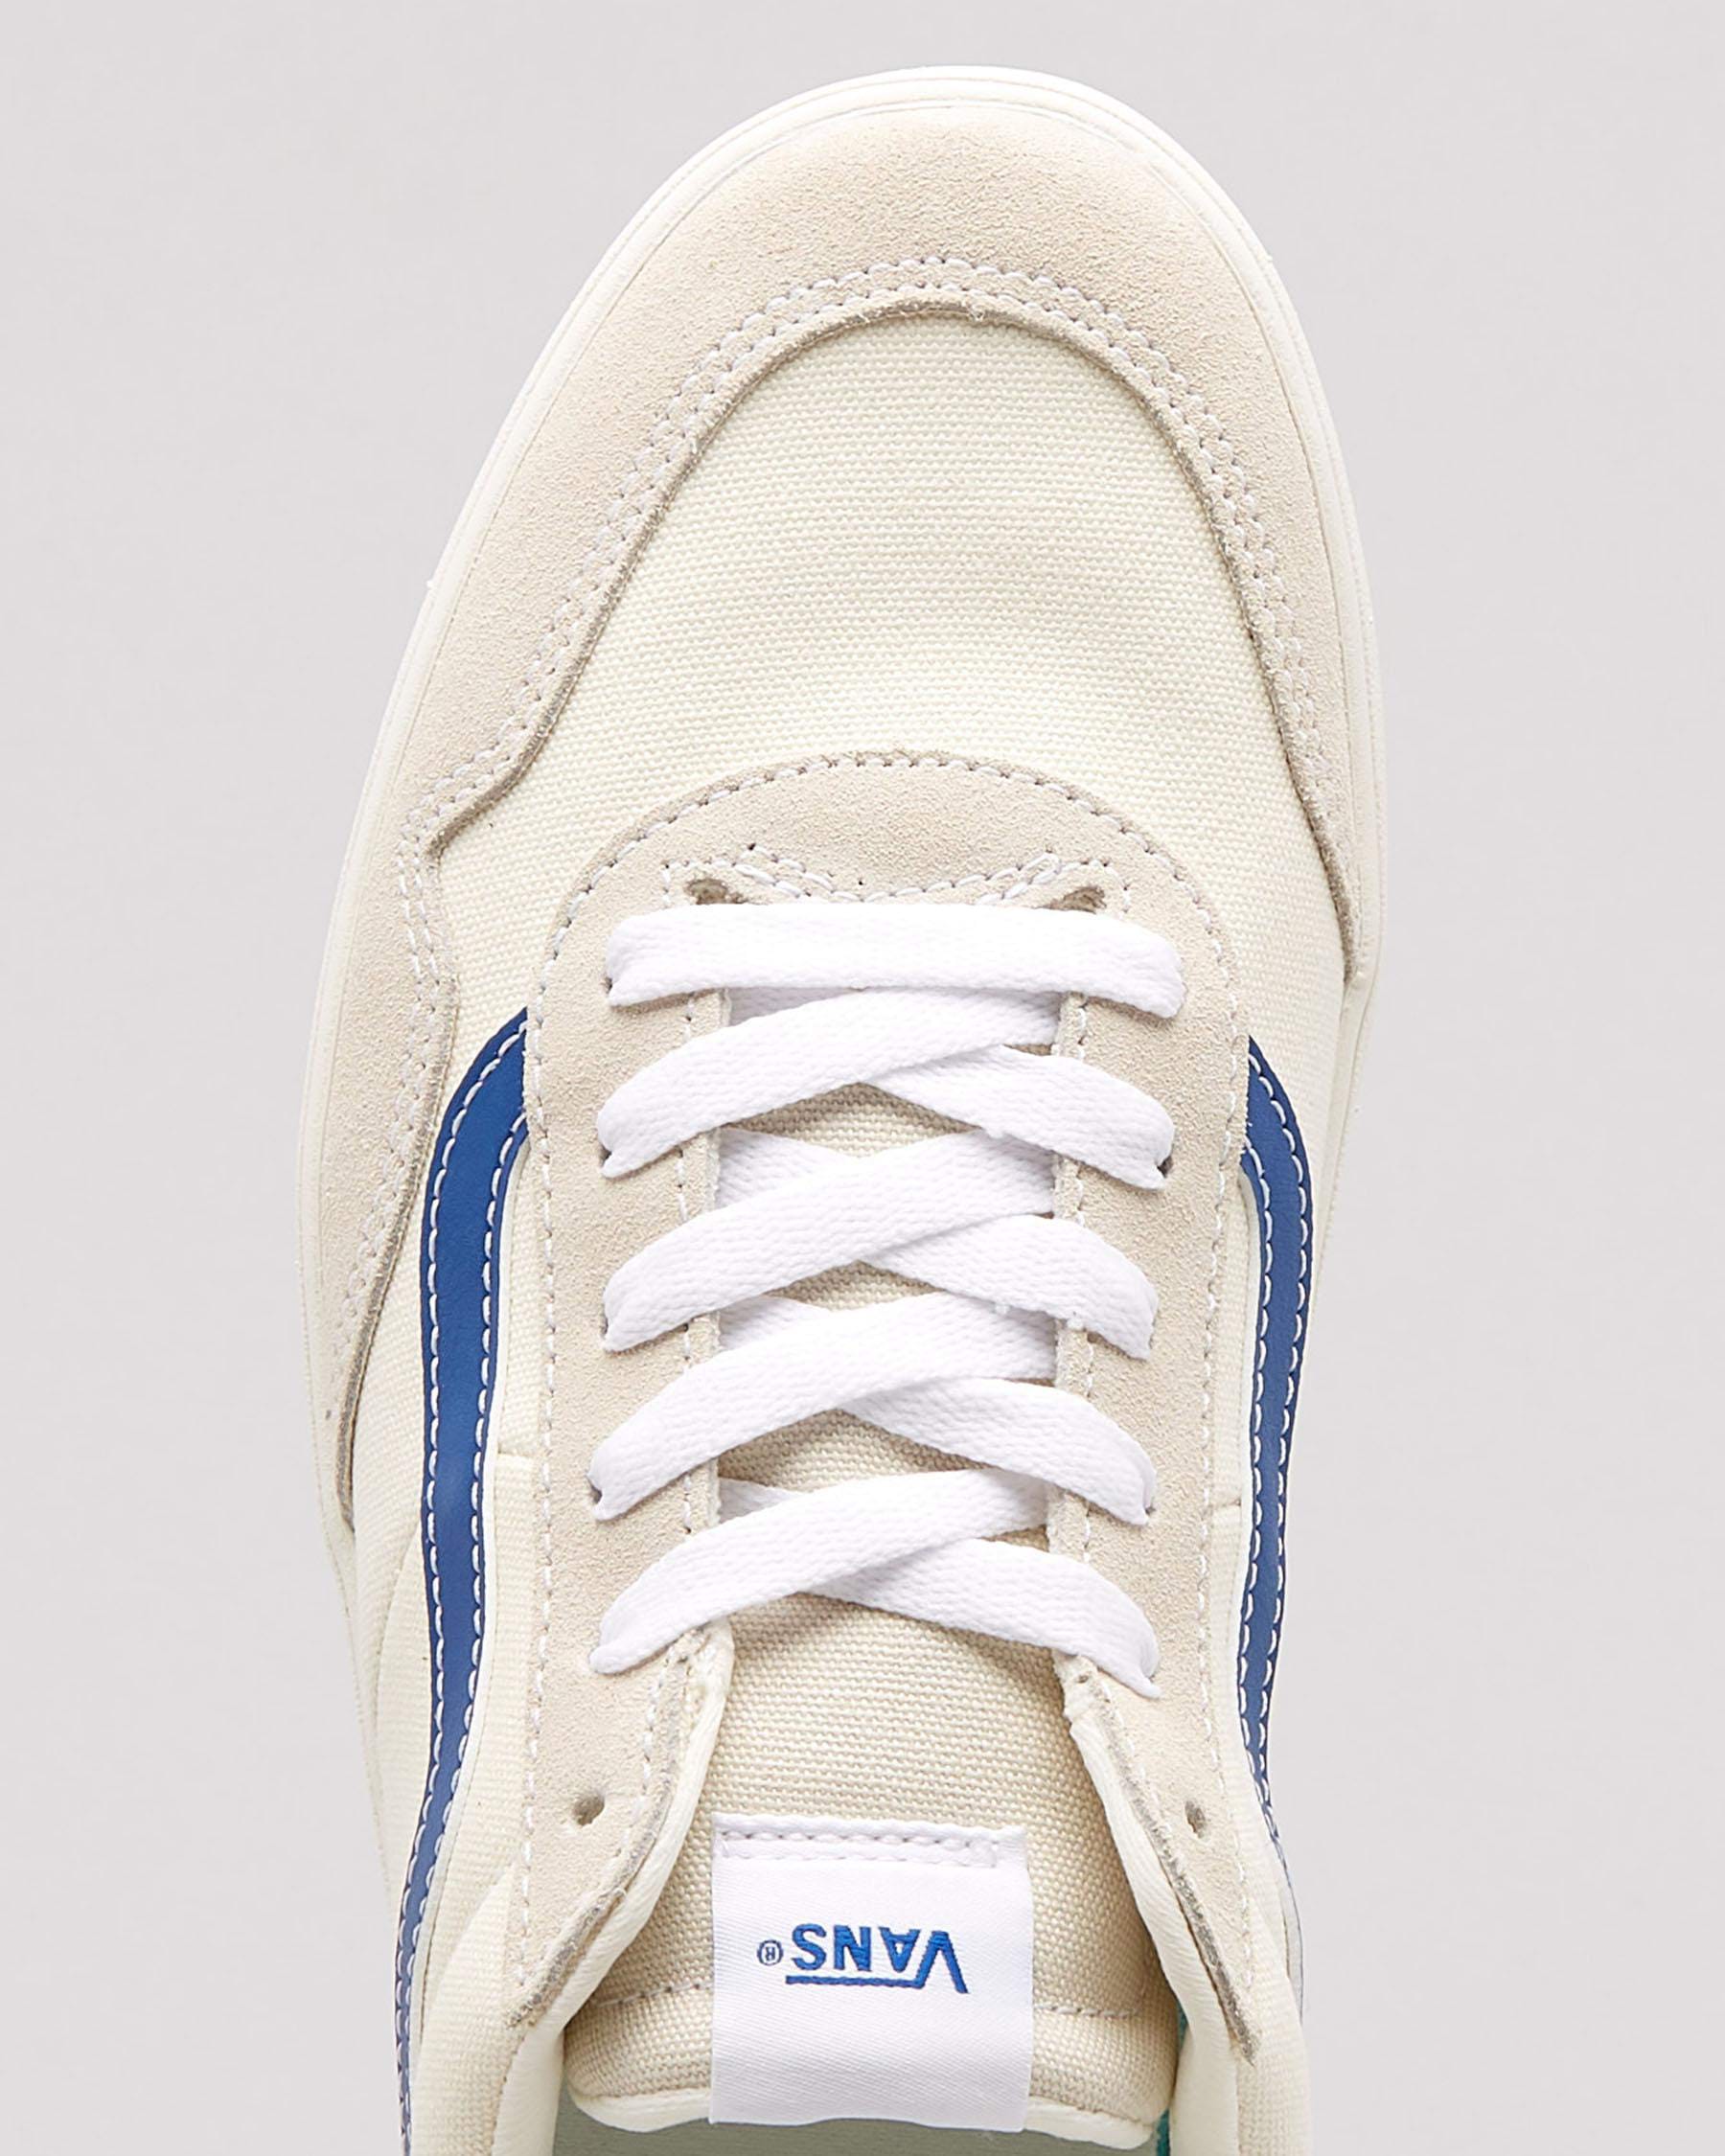 Vans Cruz Too Shoes In Turtledove/white - Fast Shipping & Easy Returns ...